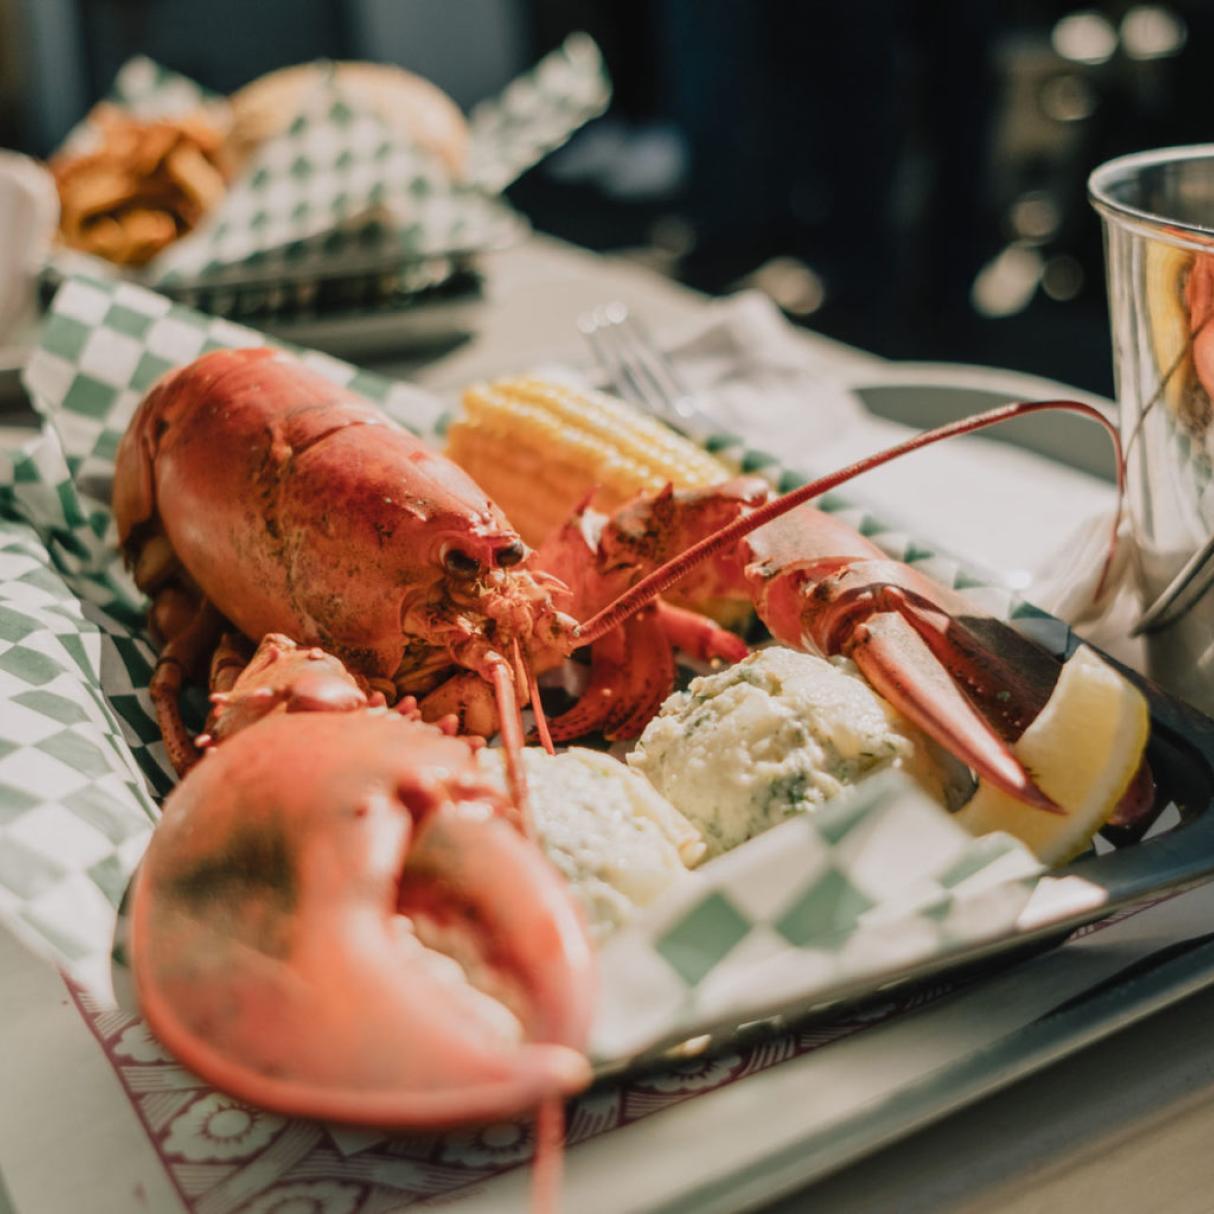 A lobster dinner is served